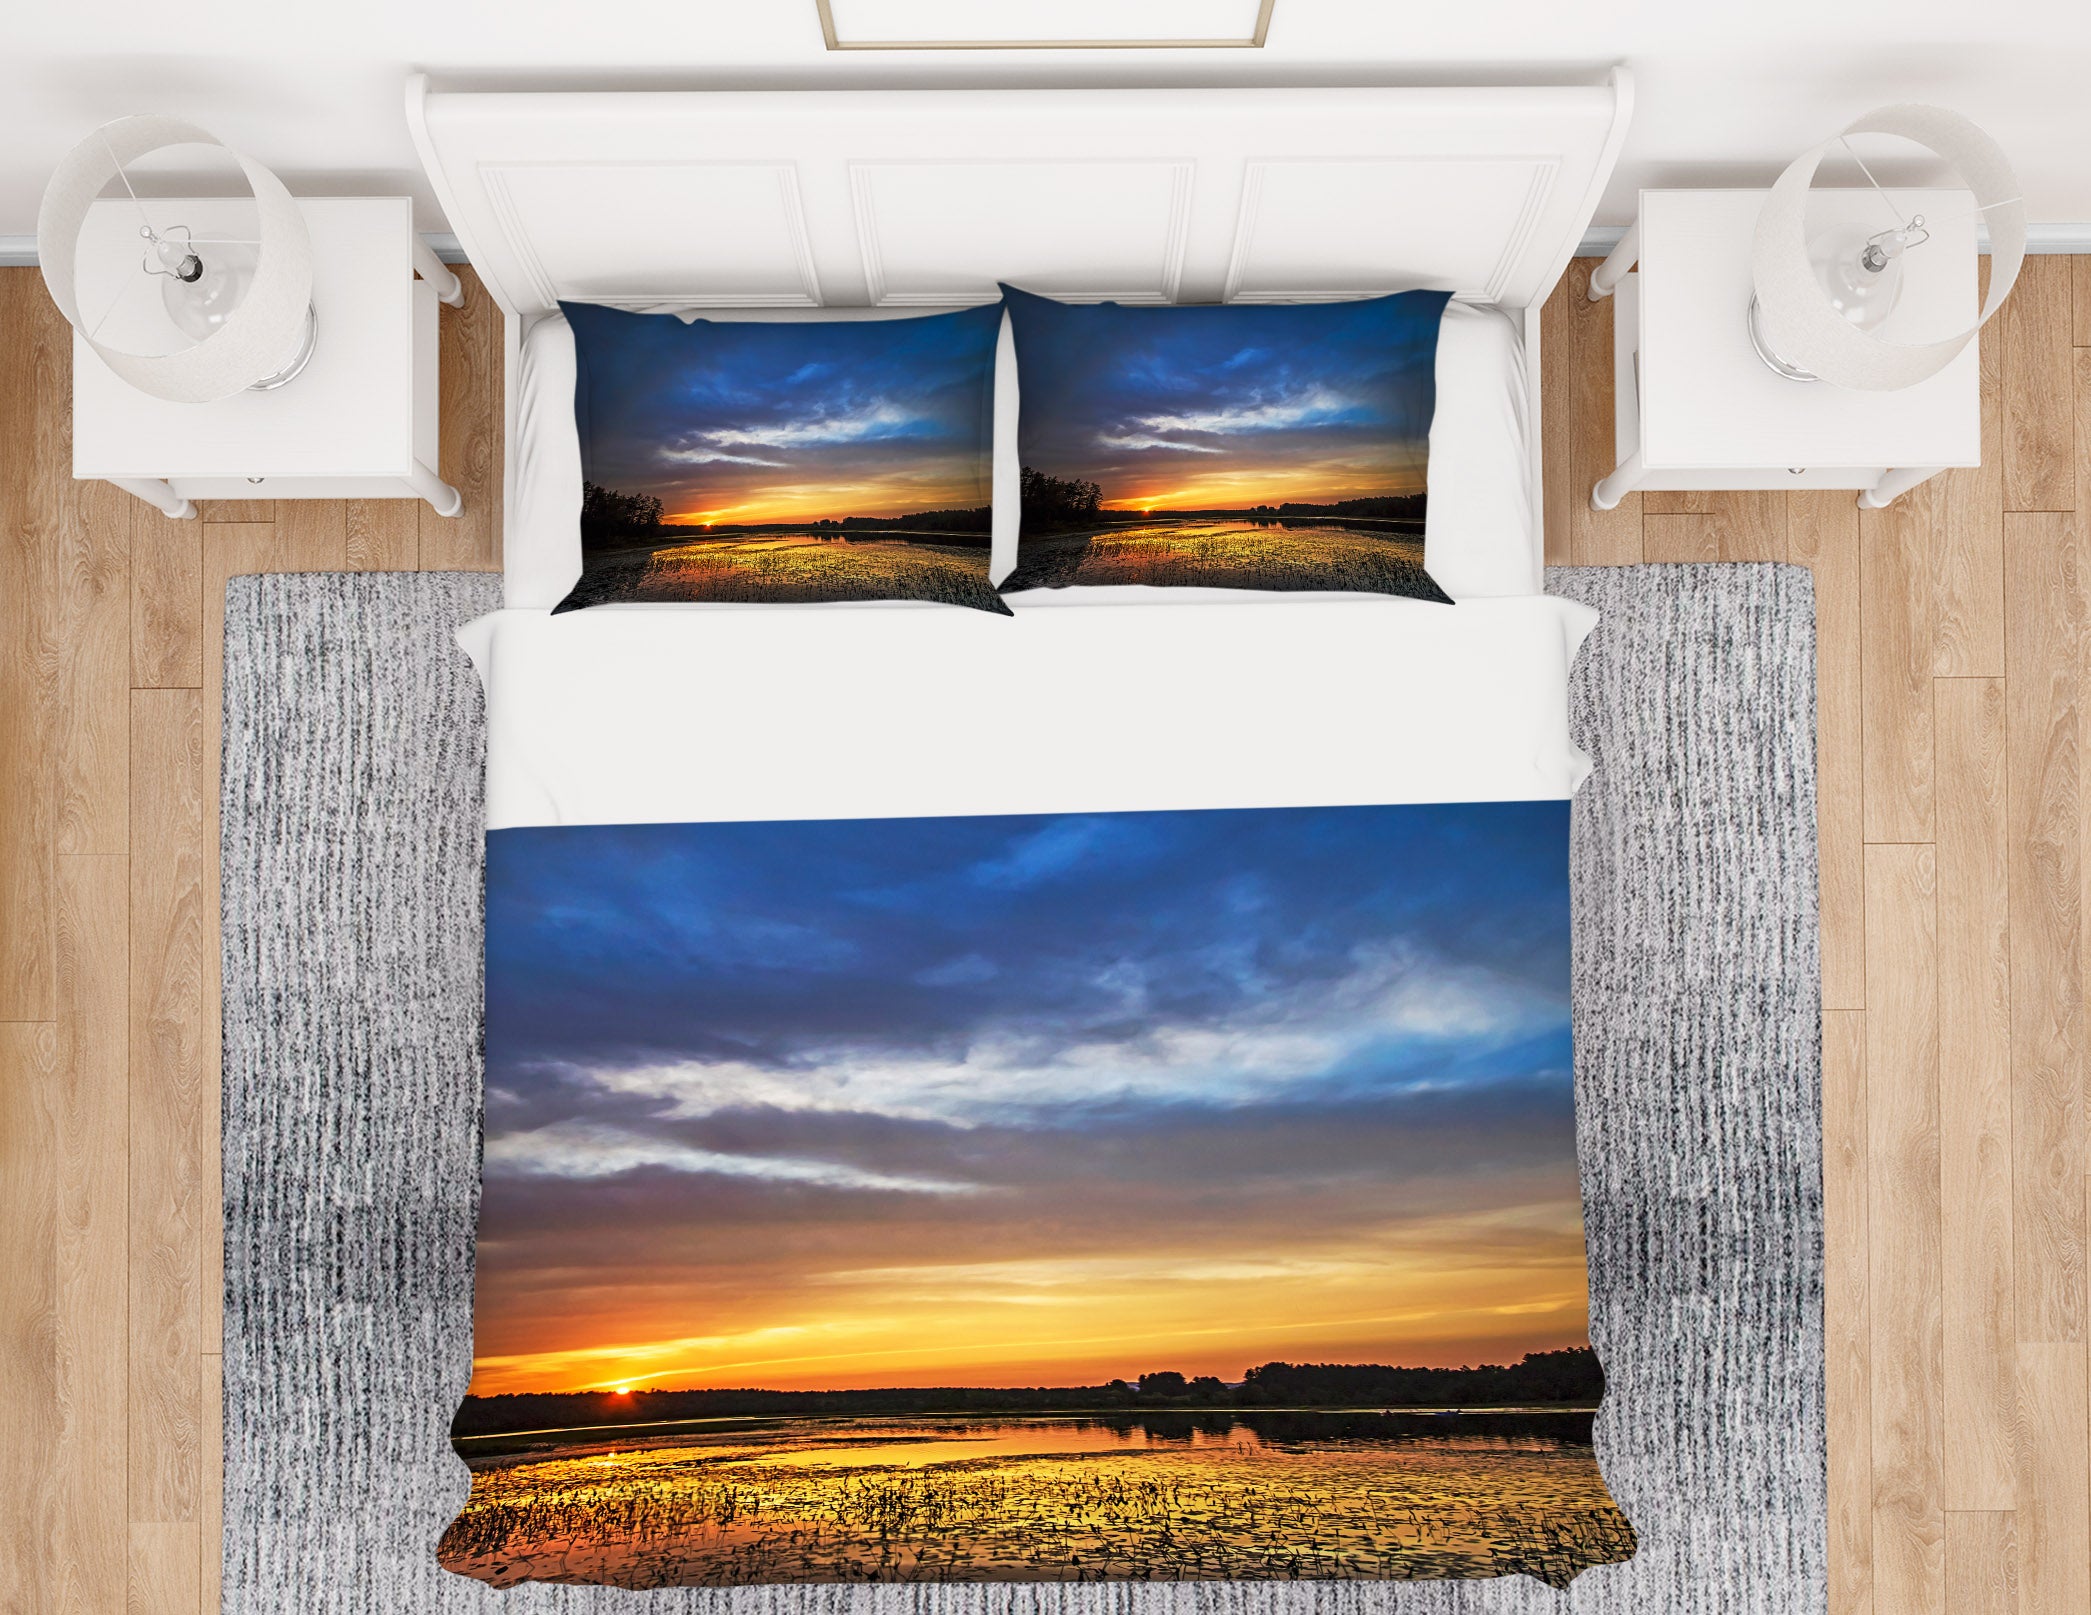 3D Peaceful Sunset 86036 Jerry LoFaro bedding Bed Pillowcases Quilt